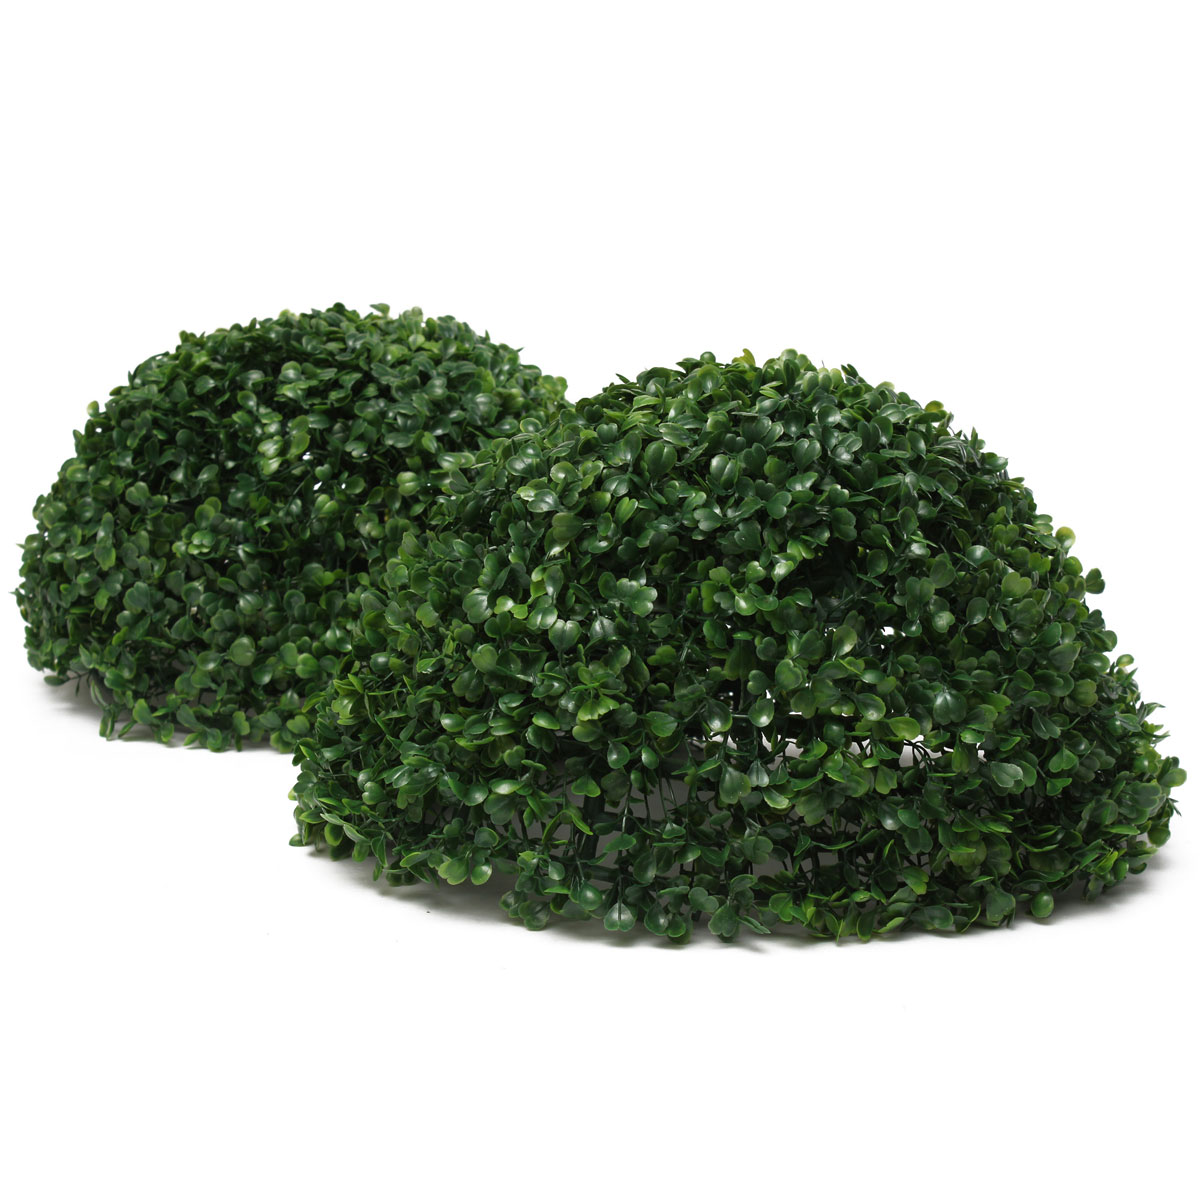 35cm-Plastic-Artificial-Topiary-Grass-Ball-Leaf-Effect-Ball-Wedding-Gardening-Hanging-Decoration-1036994-7